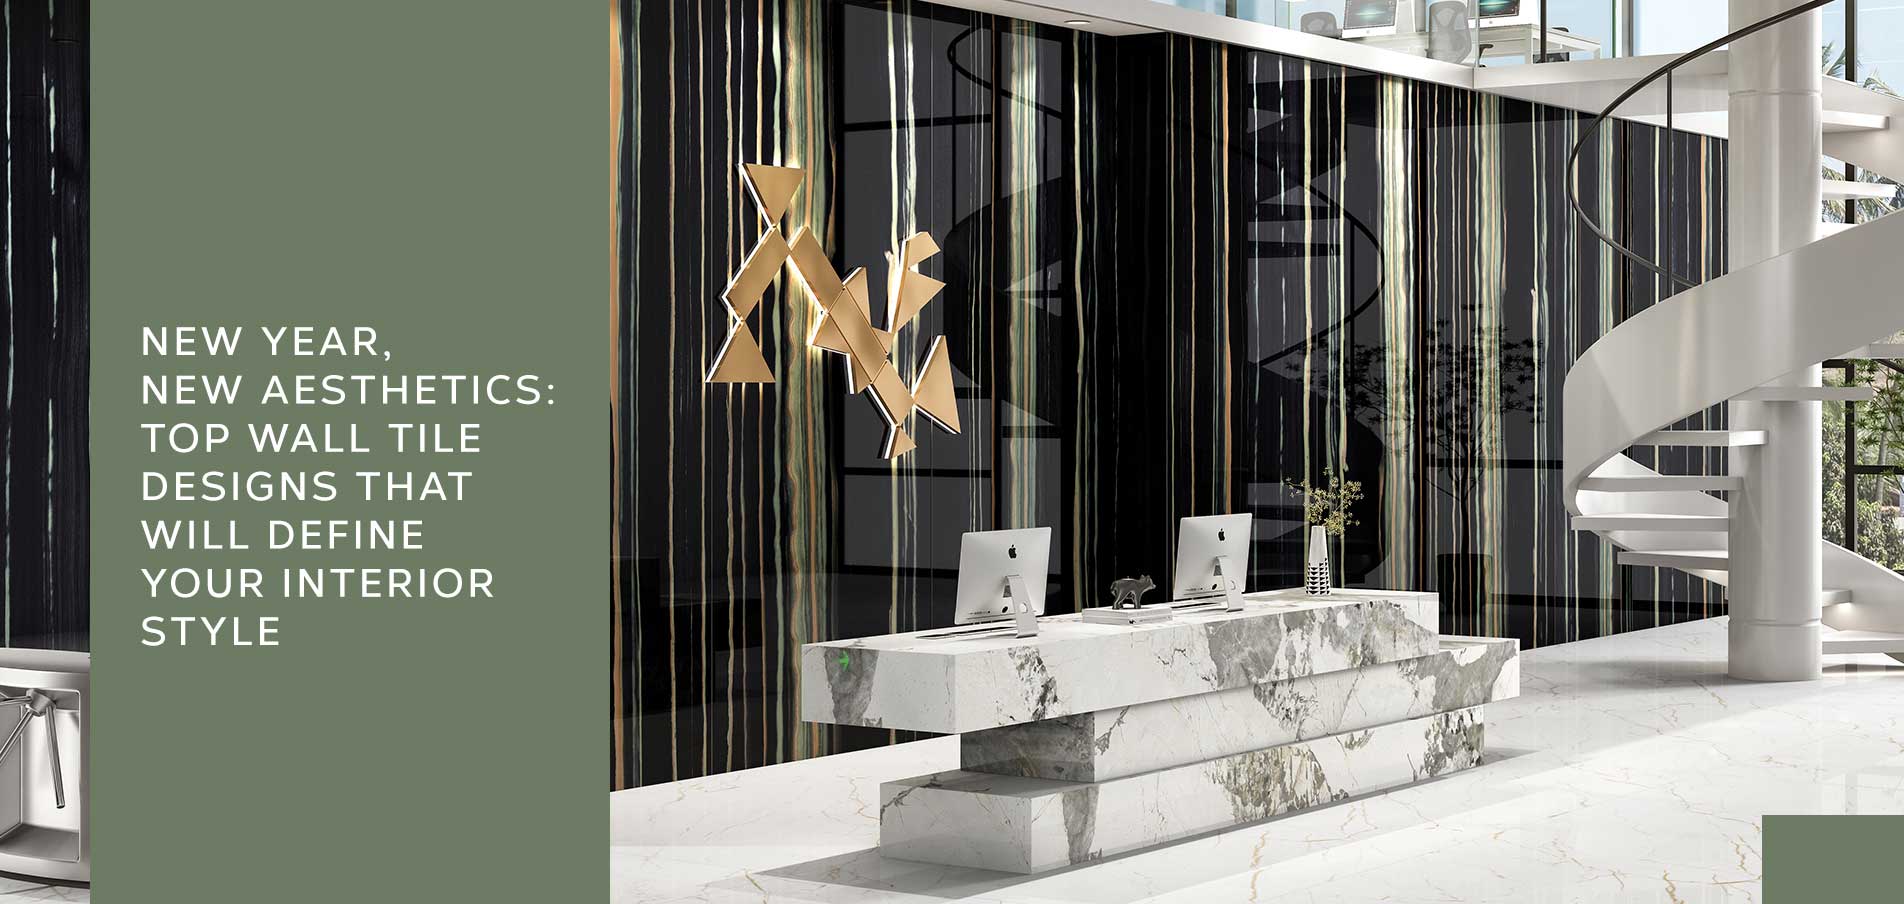 New Year,New Aesthetics Top Wall Tile Designs That Will Define Your Interior Style